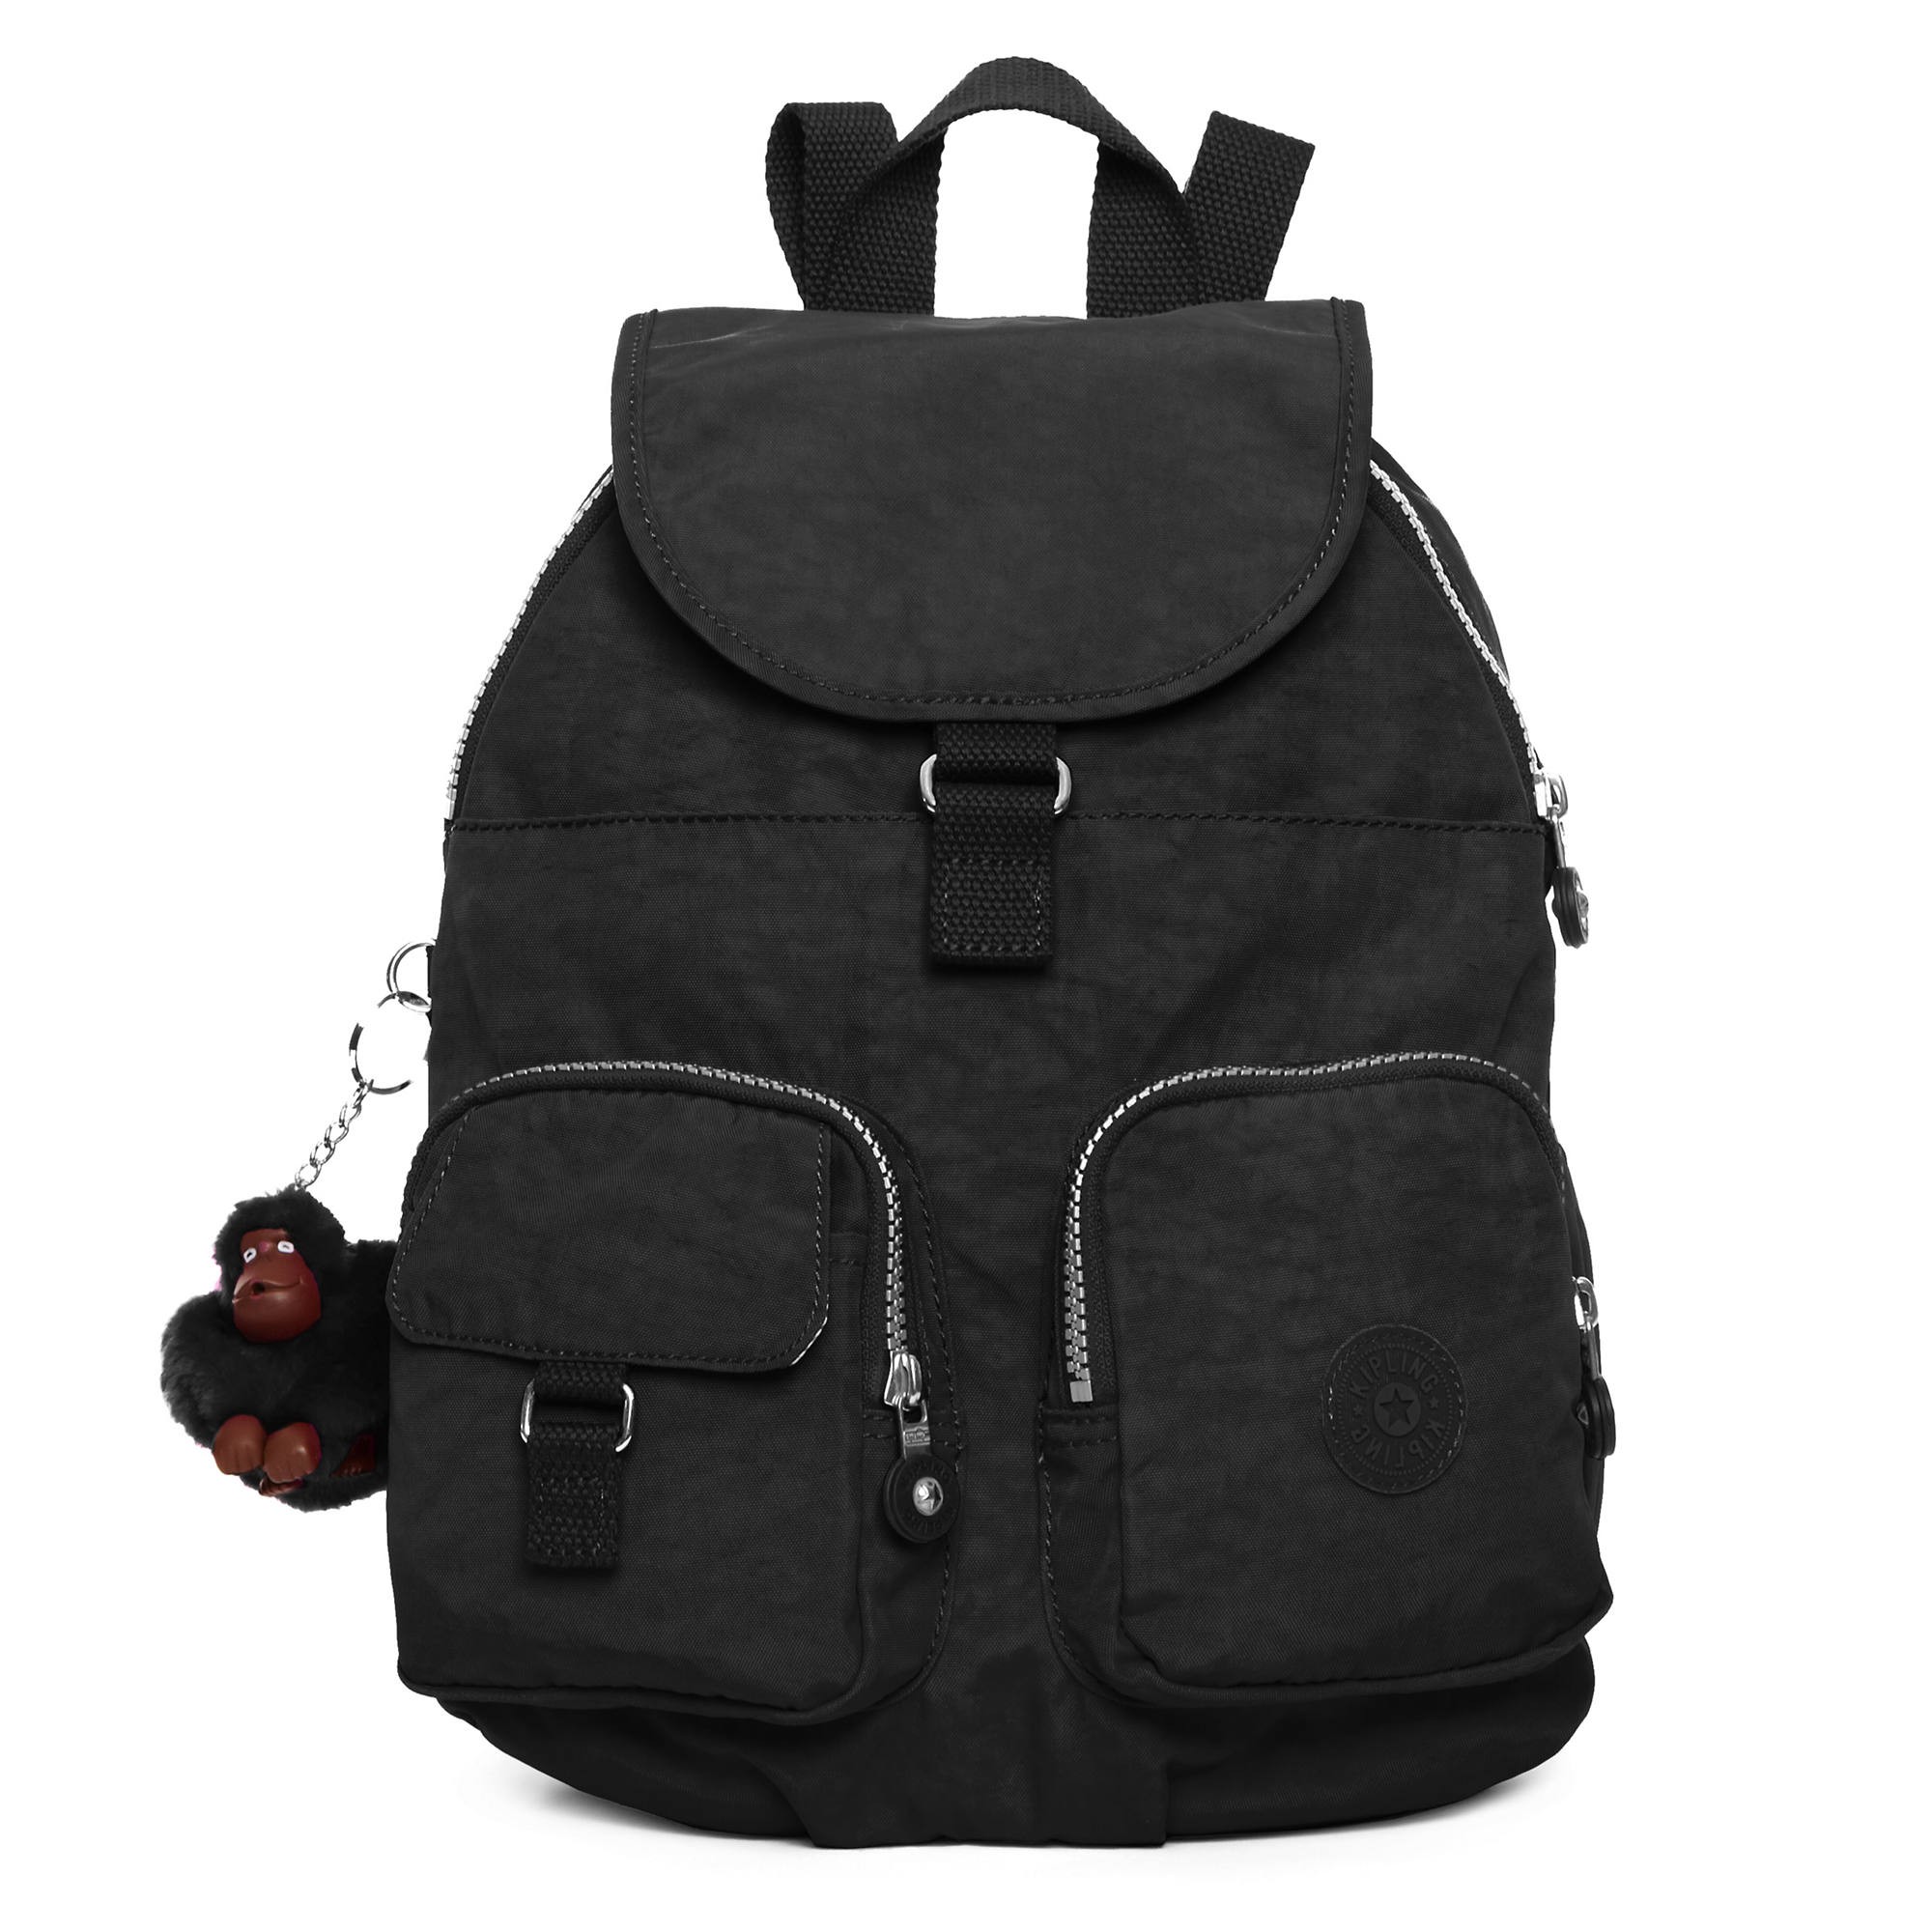 Paard Smash planter Firefly Small Backpack | Kipling